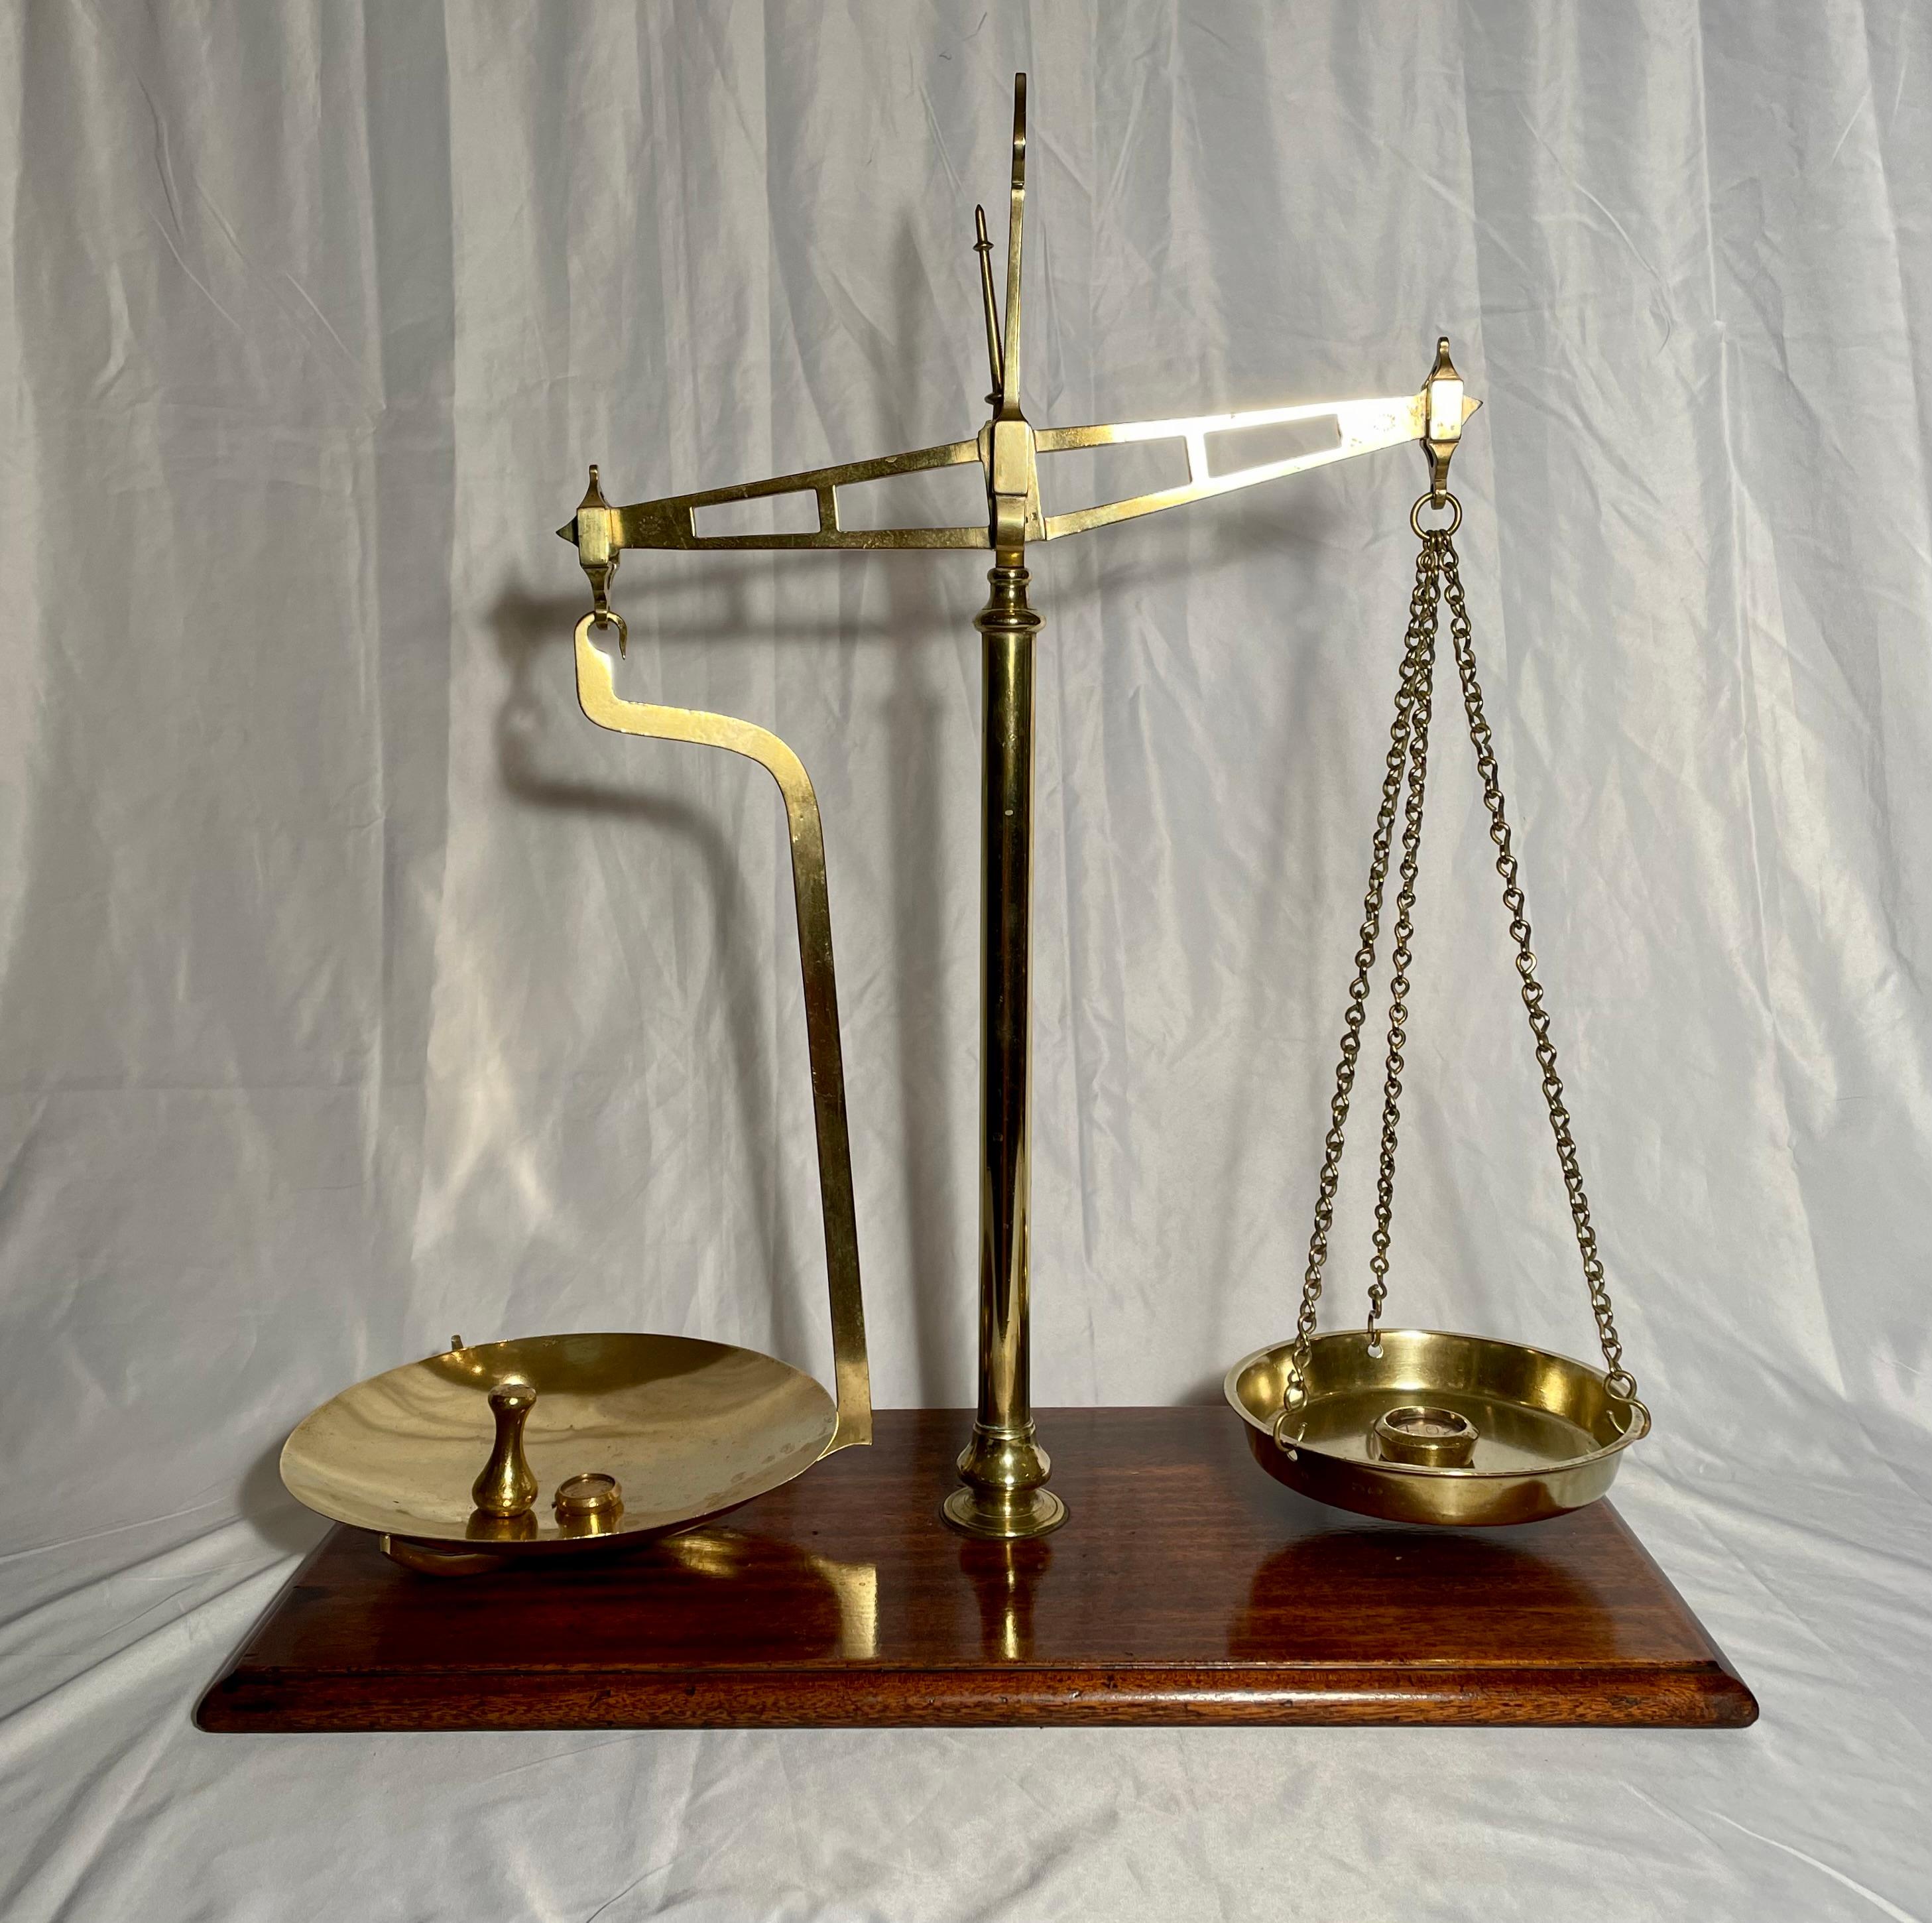 19th Century Victorian Era Brass and Wood Set of Scales with Assorted Weights.